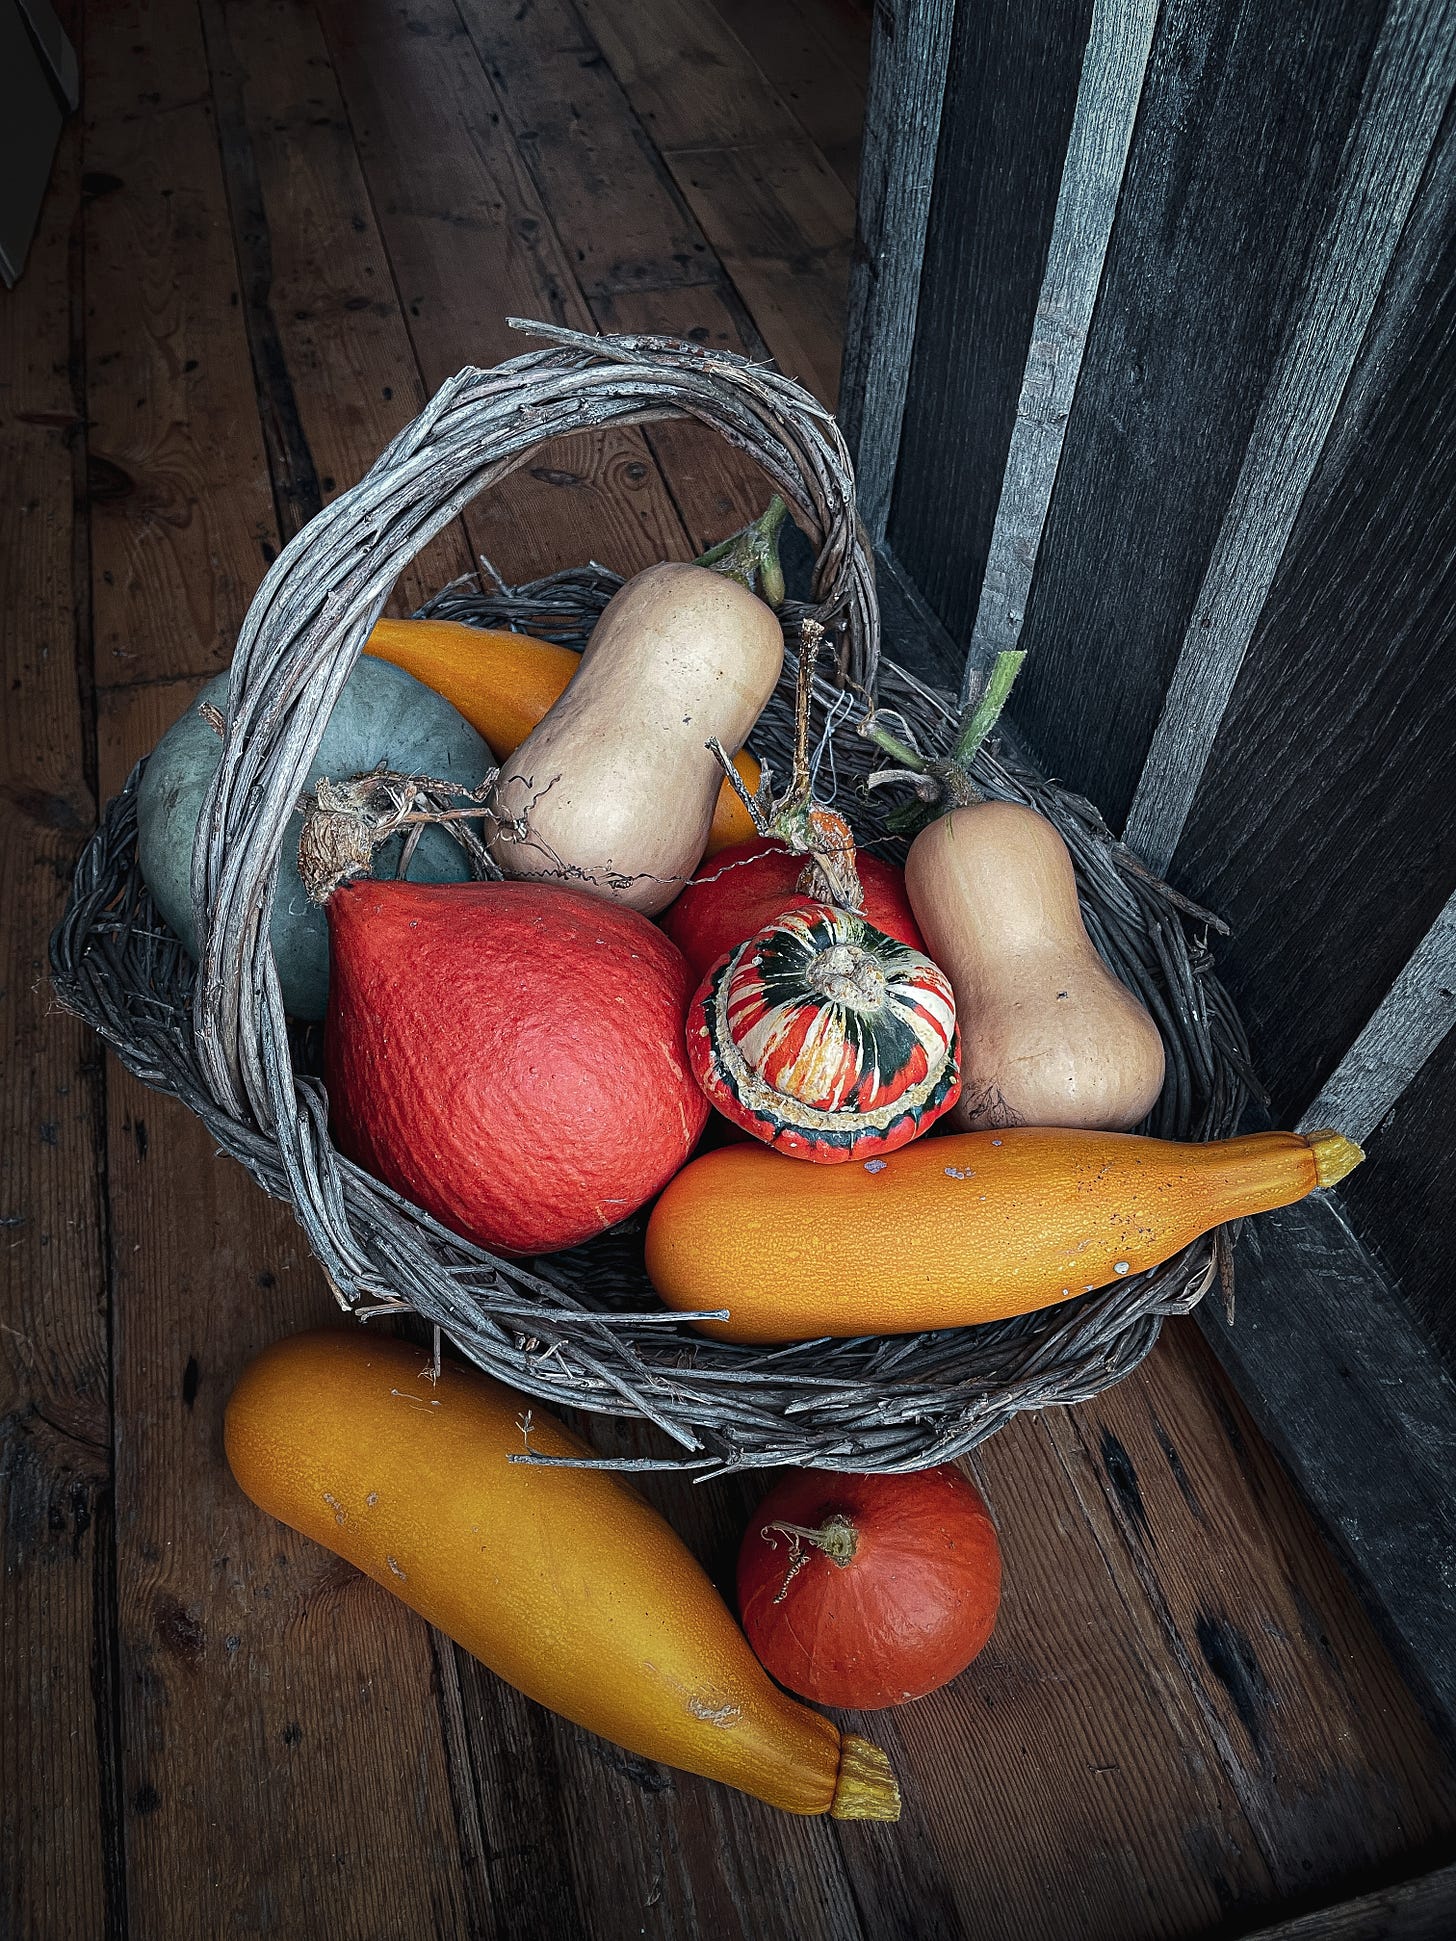 A basket full of small squash on a wood floor.